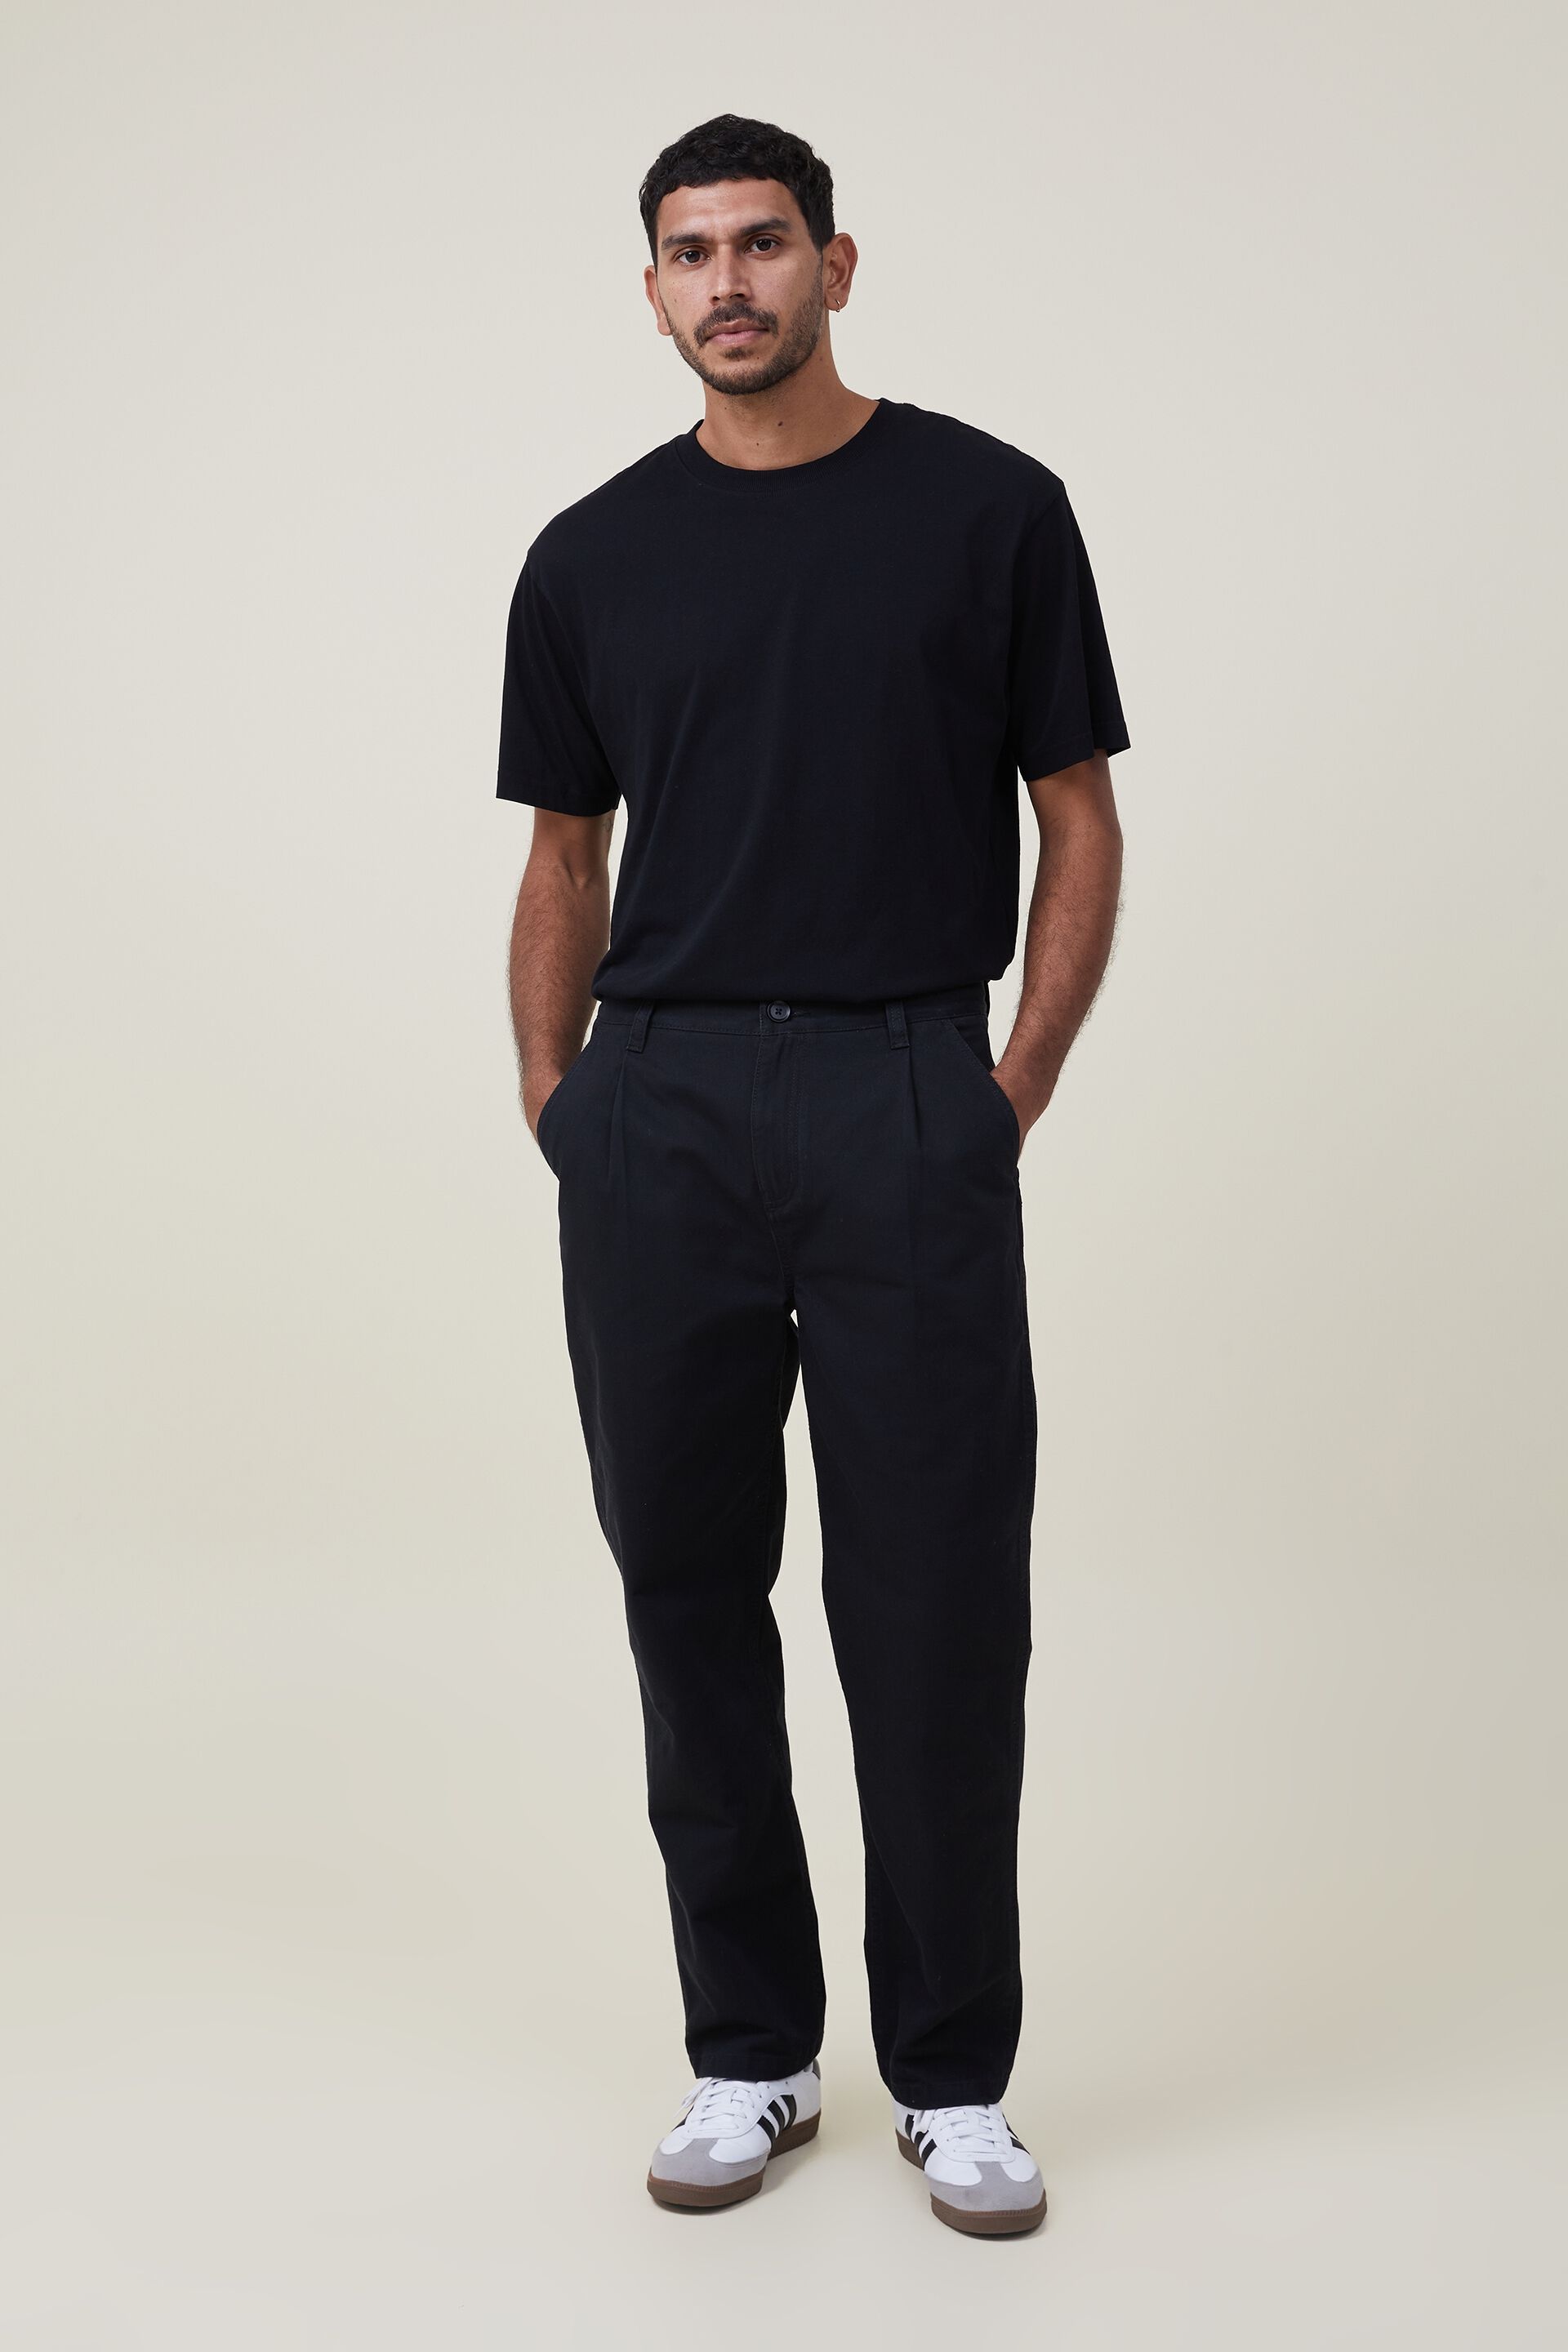 Buy The Alloy Formal and casual Pant online for men | Beyours